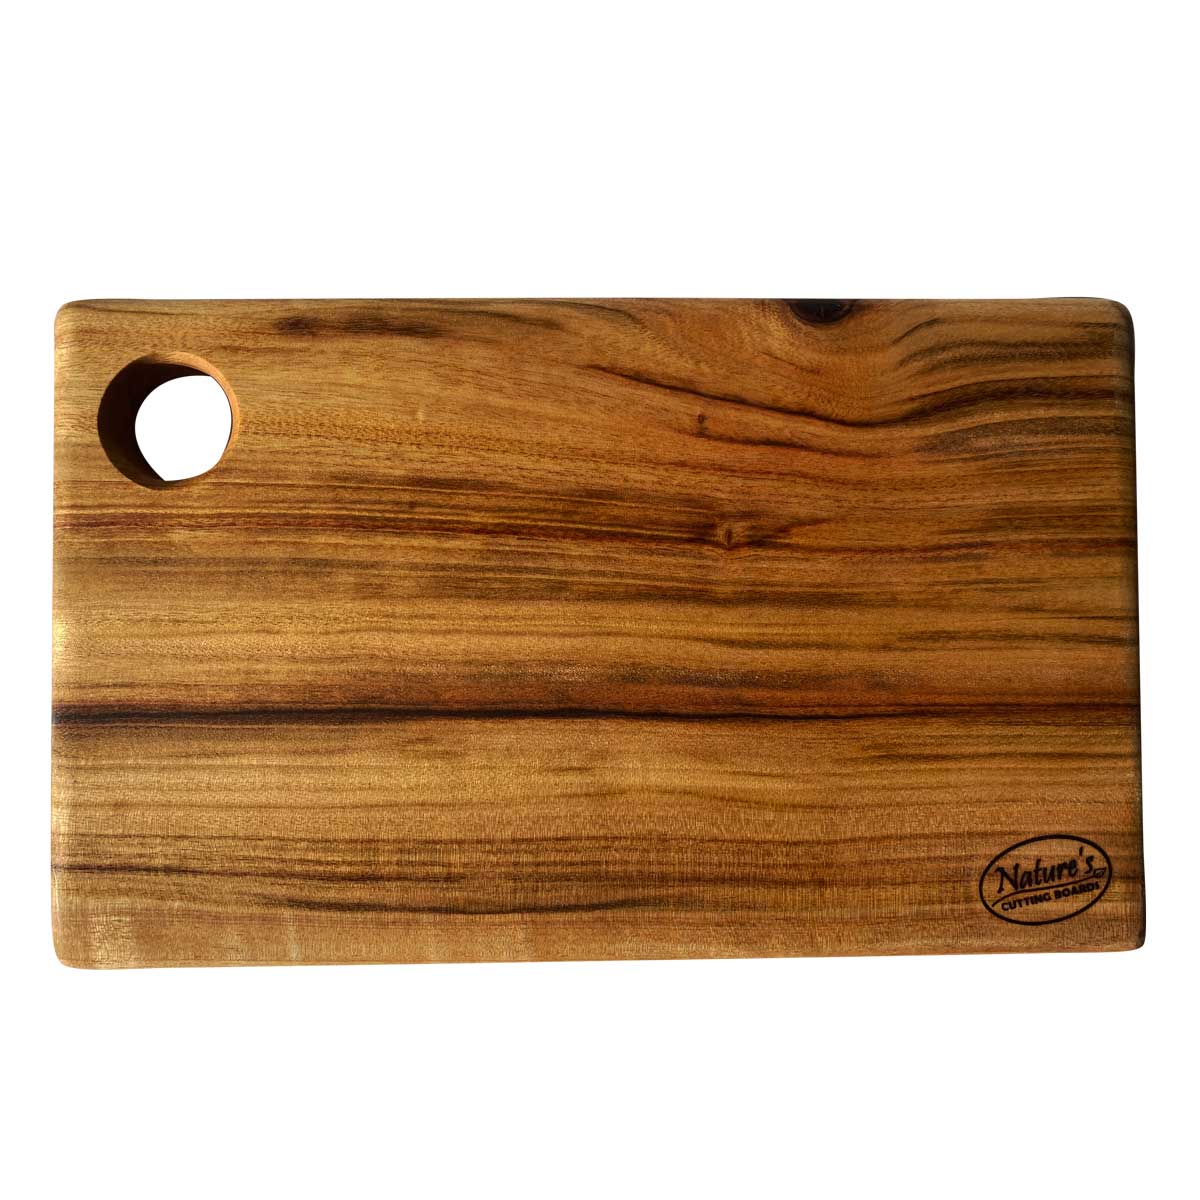 A very handy and versatile camphor laurel wood cutting board and serving tray with a hole in one corner for handing and handling. Can be used as a cheese platter or wooden chopping board by Nature's Boards.